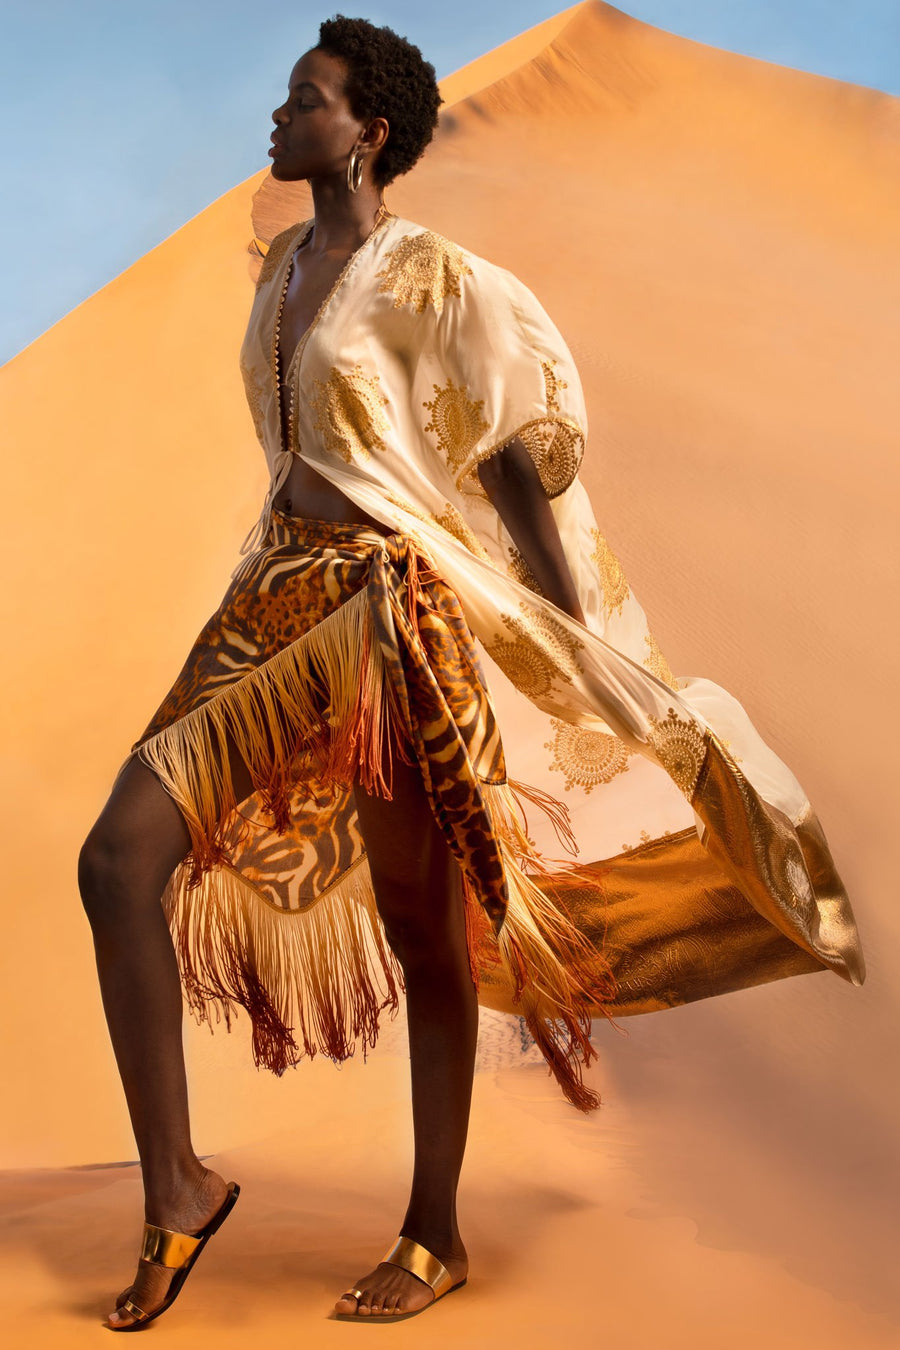 This is a photo of a woman wearing a cheetah pareo with ombre fringe on the hemline. On top, she wears a white coat with gold embellishments and a gold hemline. She stands in front of a desert sand dune.